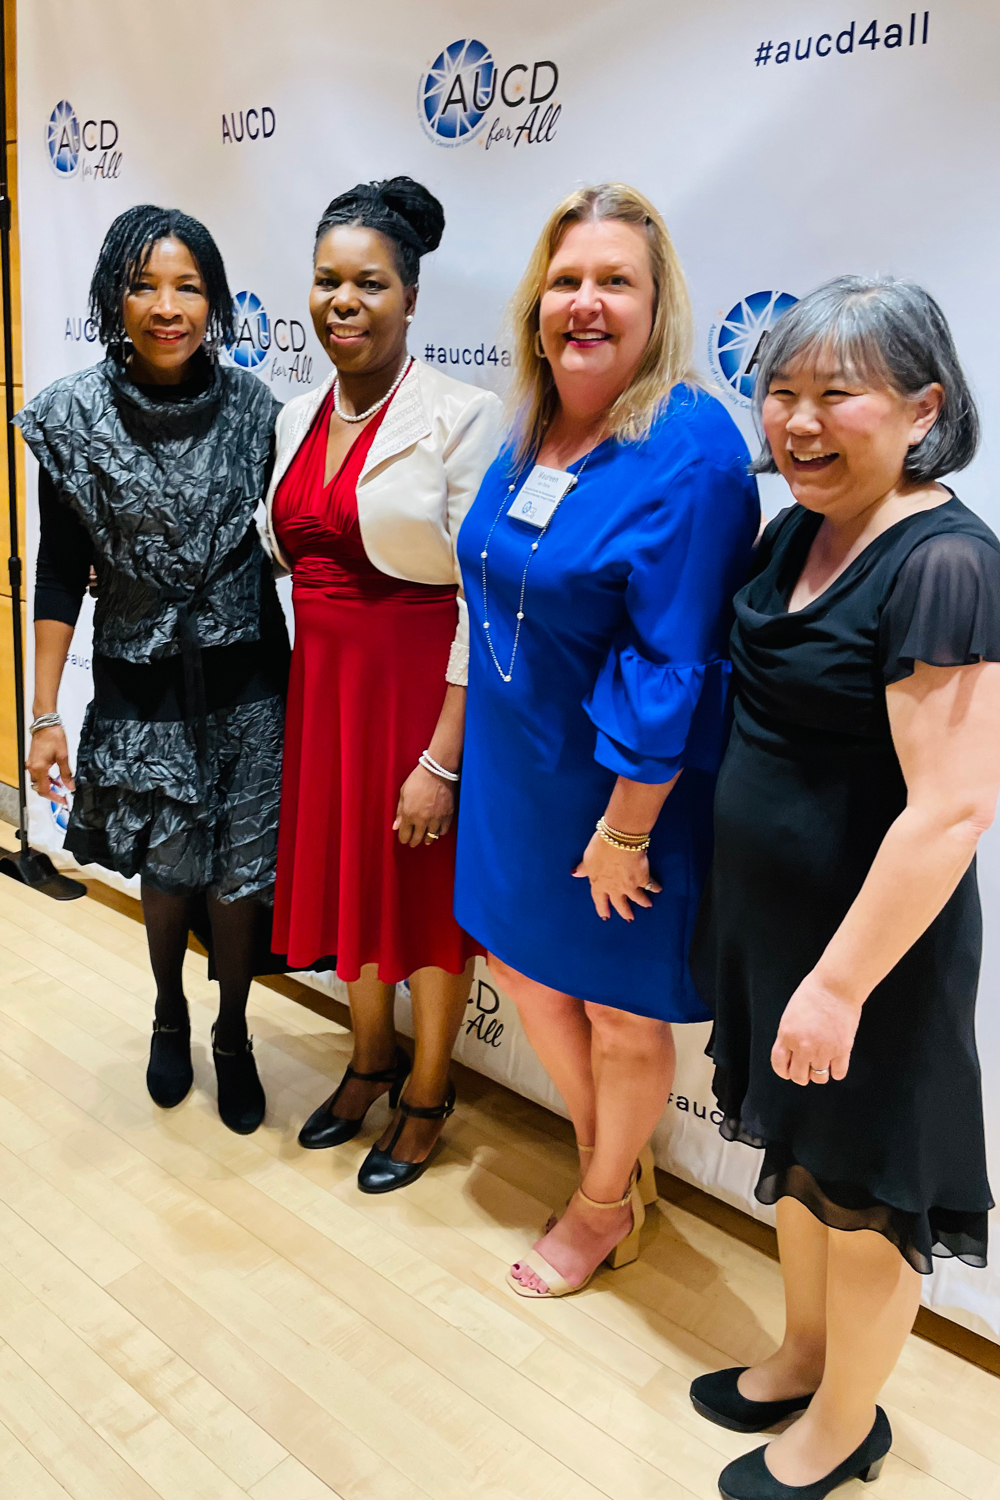 Four women stand in front of an AUCD branded banner at the Association of University Centers on Disabilities (AUCD) Gala.